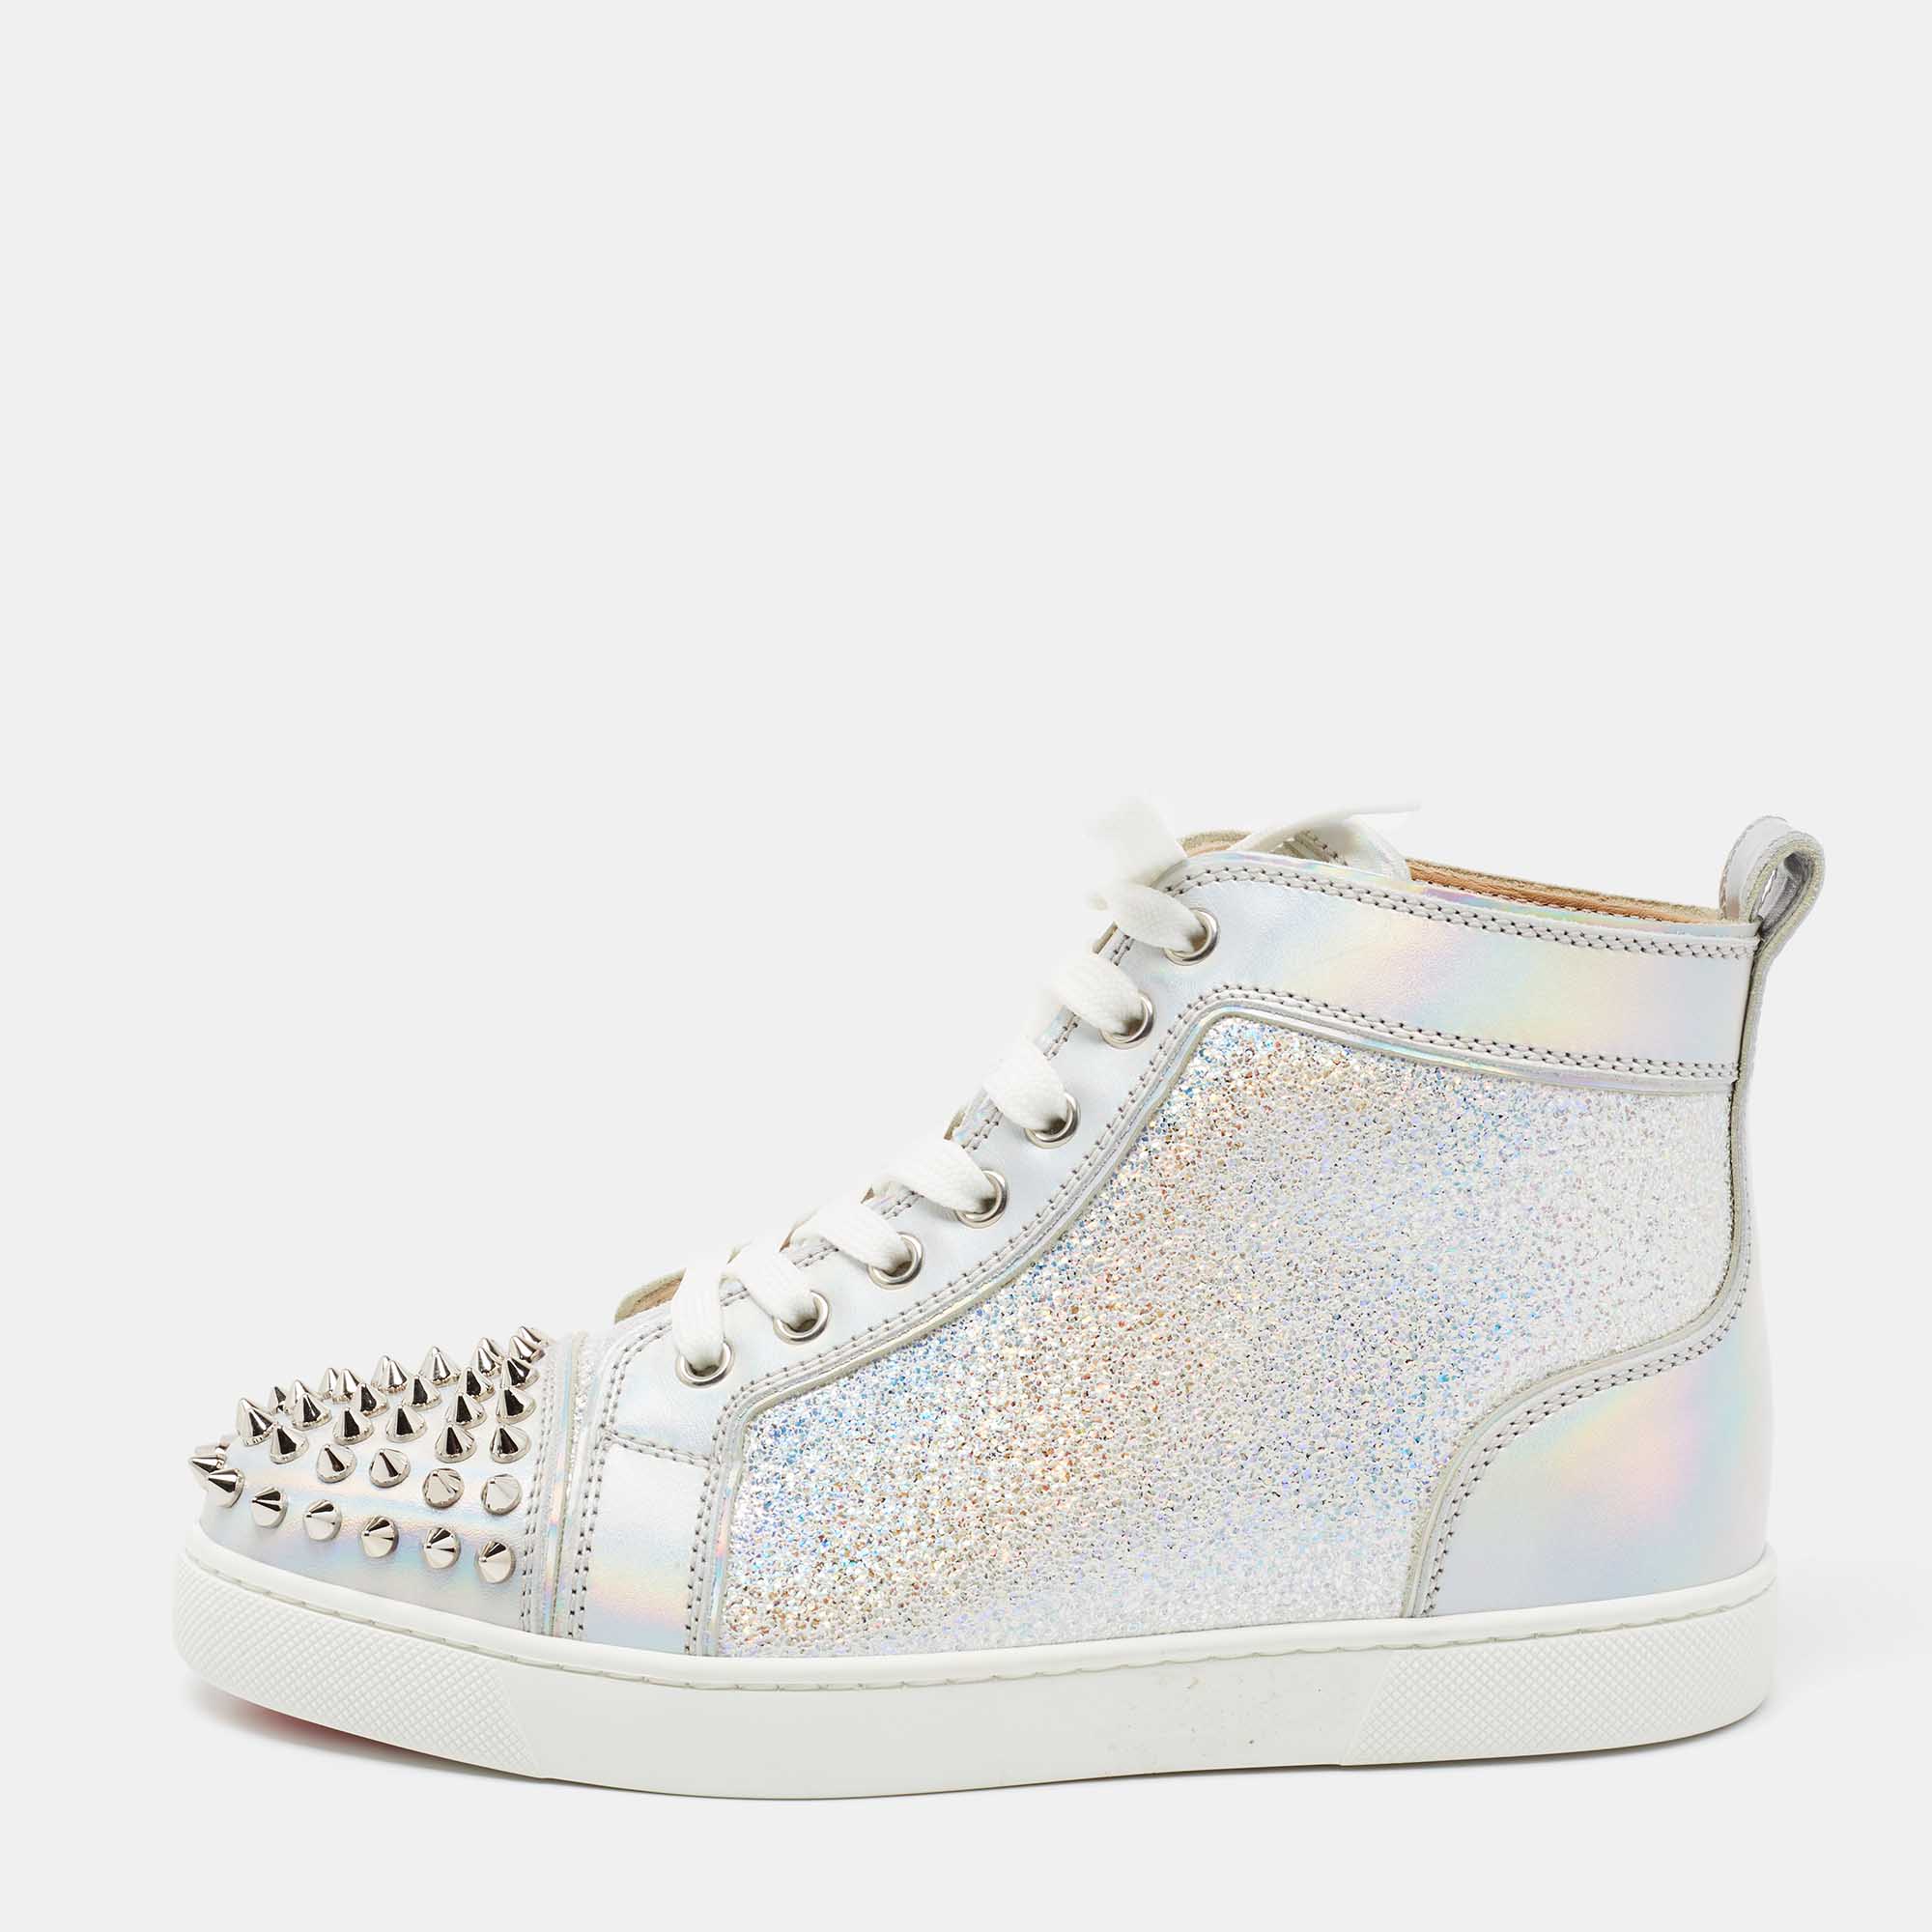 Christian Louboutin Silver Leather Lou Spikes High Top Sneakers Size 37  Christian Louboutin